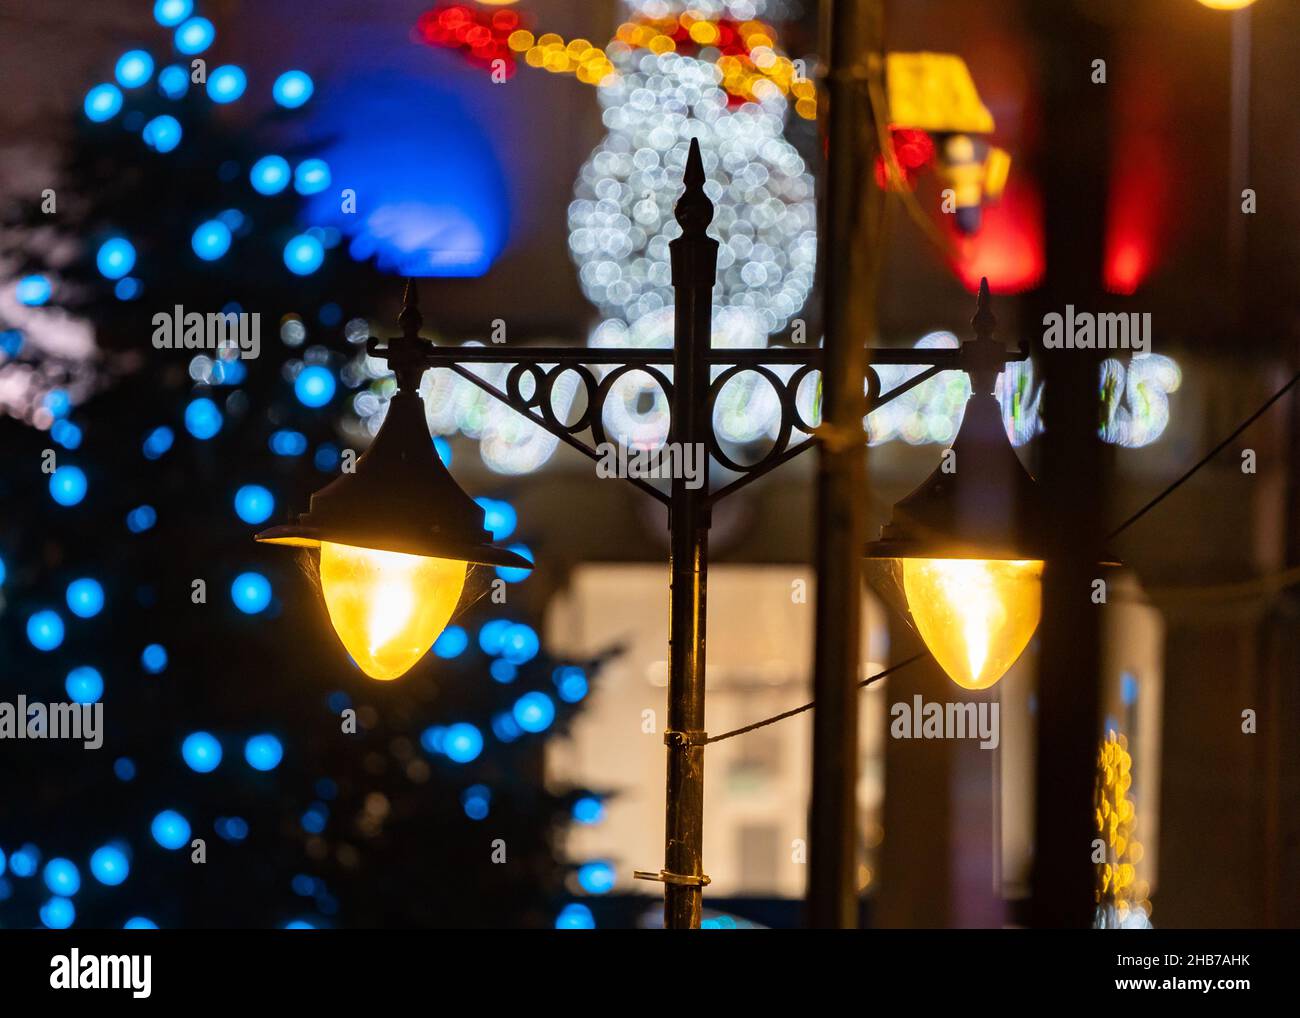 Vintage retro style double high street shopping lights. Lamps with Christmas decorations illuminated and snowman lit up behind out of focus. Stock Photo